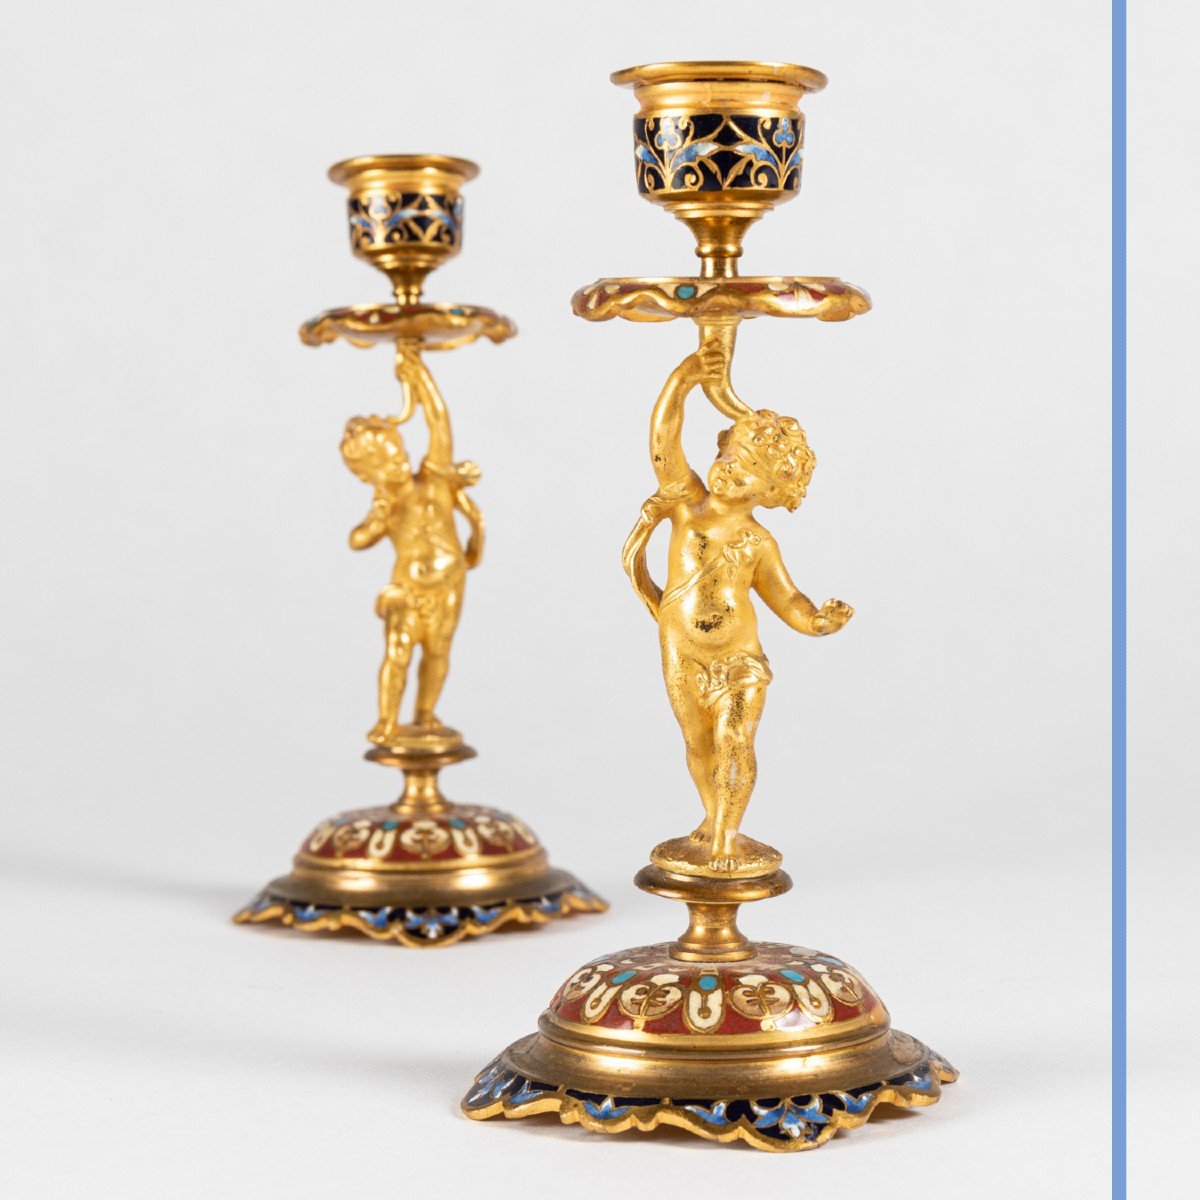 Pair Of Small Candlesticks With Babies In Gilded Bronze And Cloisonné Enamels, 19th Century-photo-3